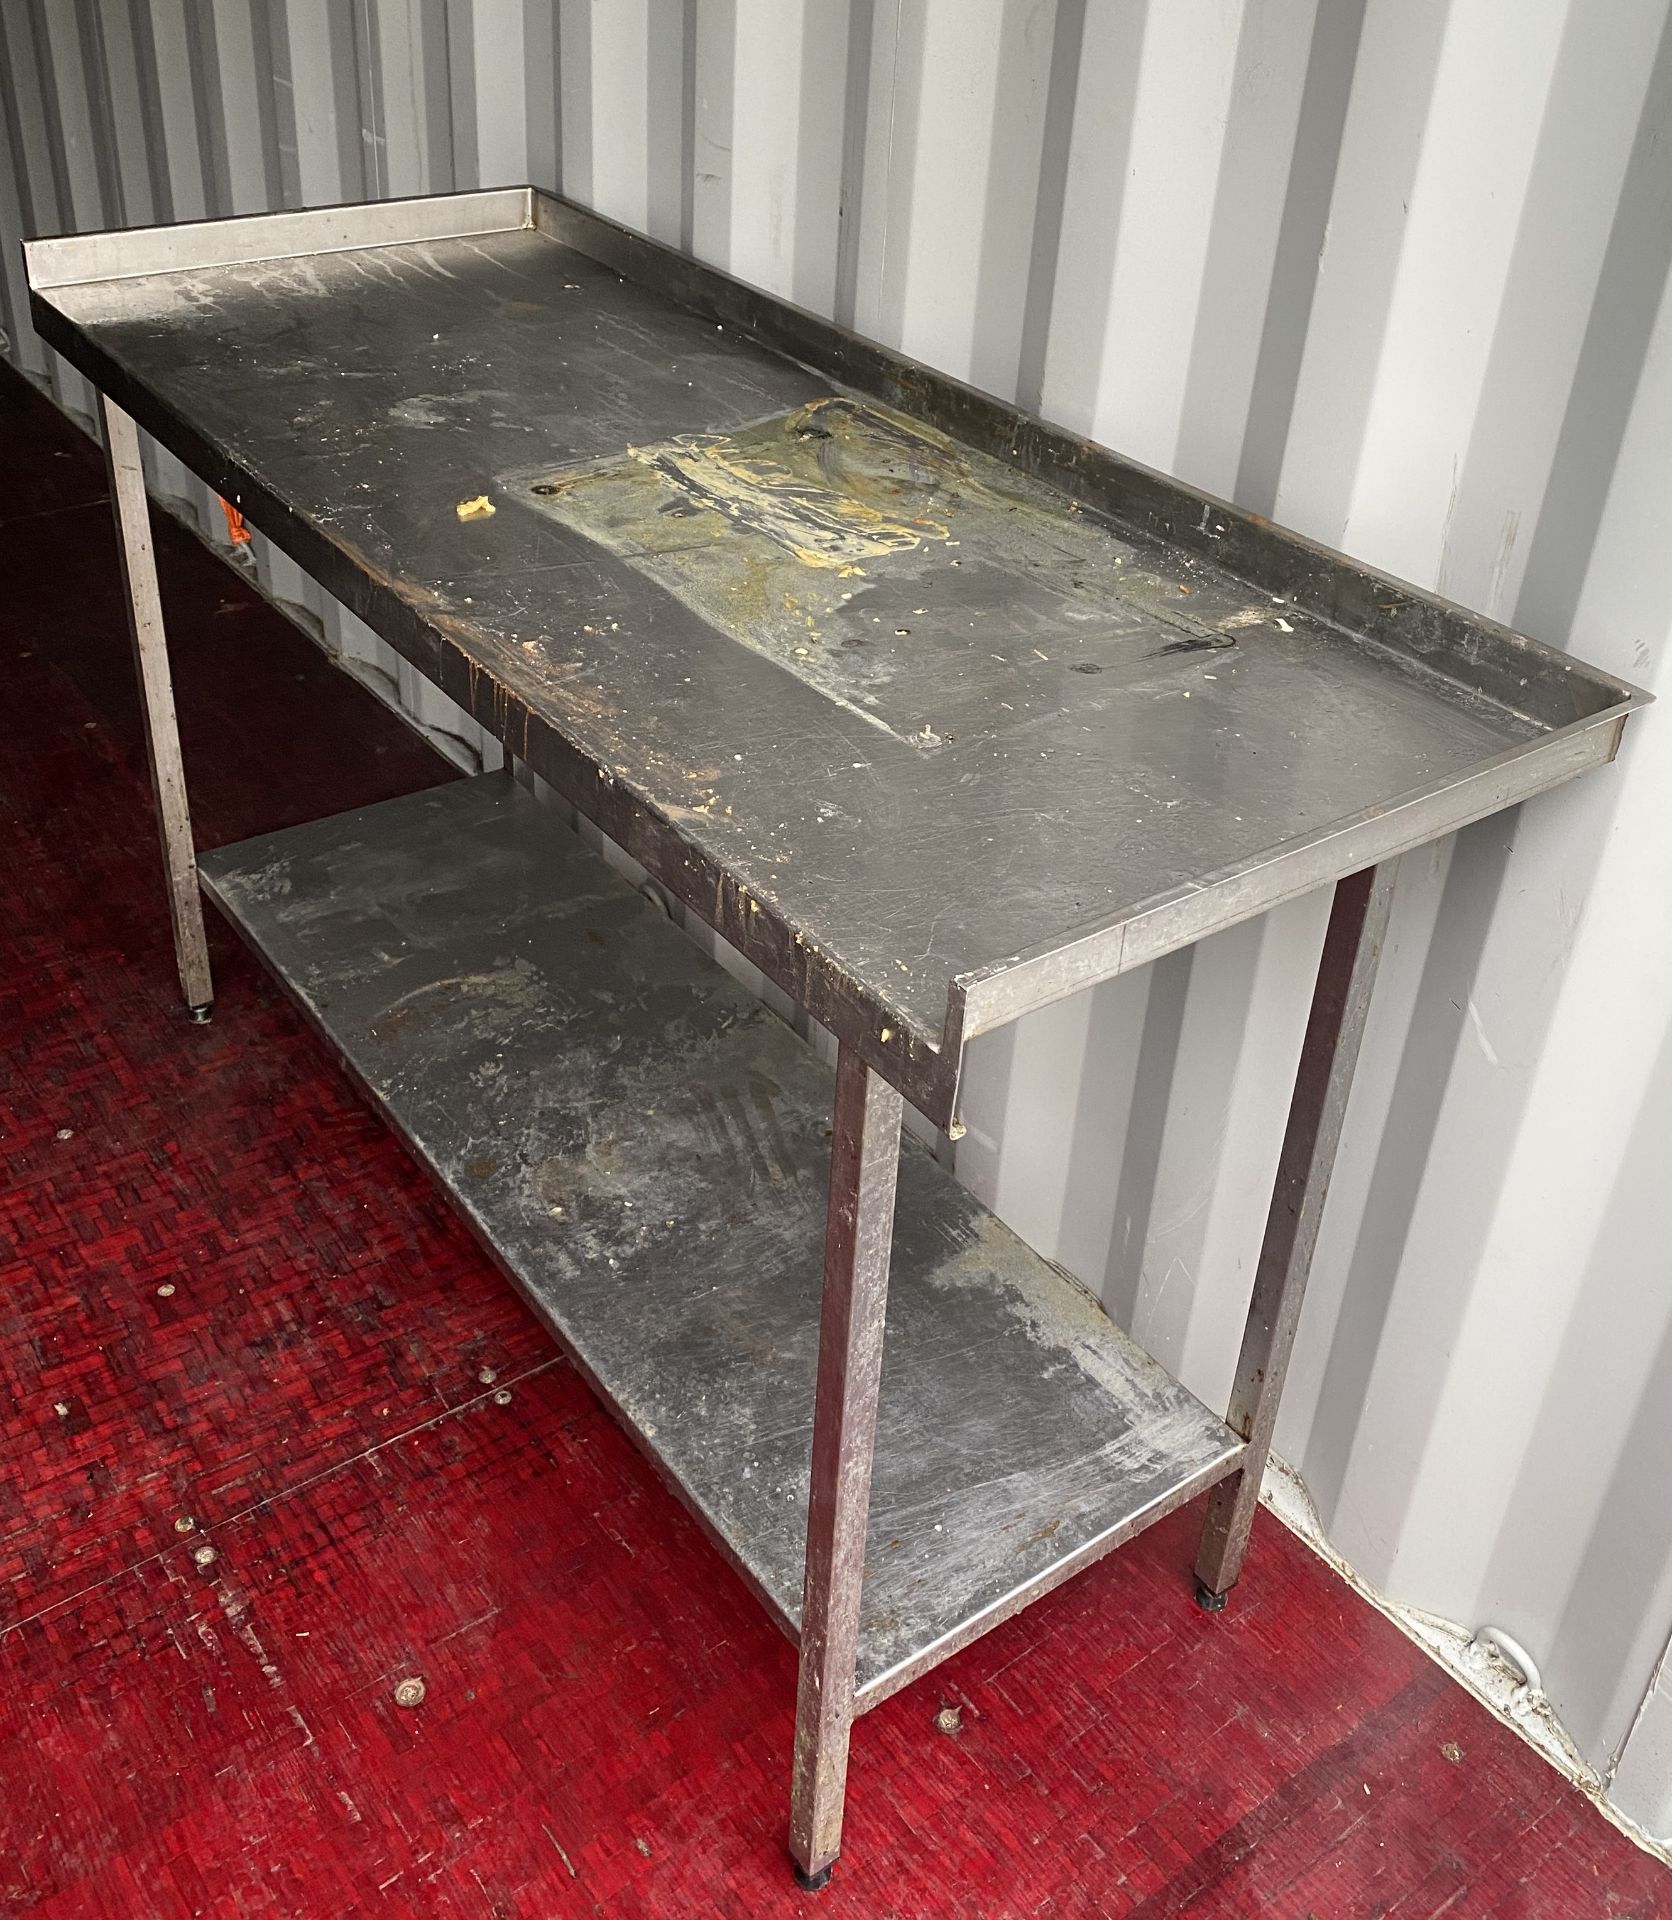 2 tier stainless steel preparation table - 133cm x 60cm x 170cm(h) - Image 2 of 2